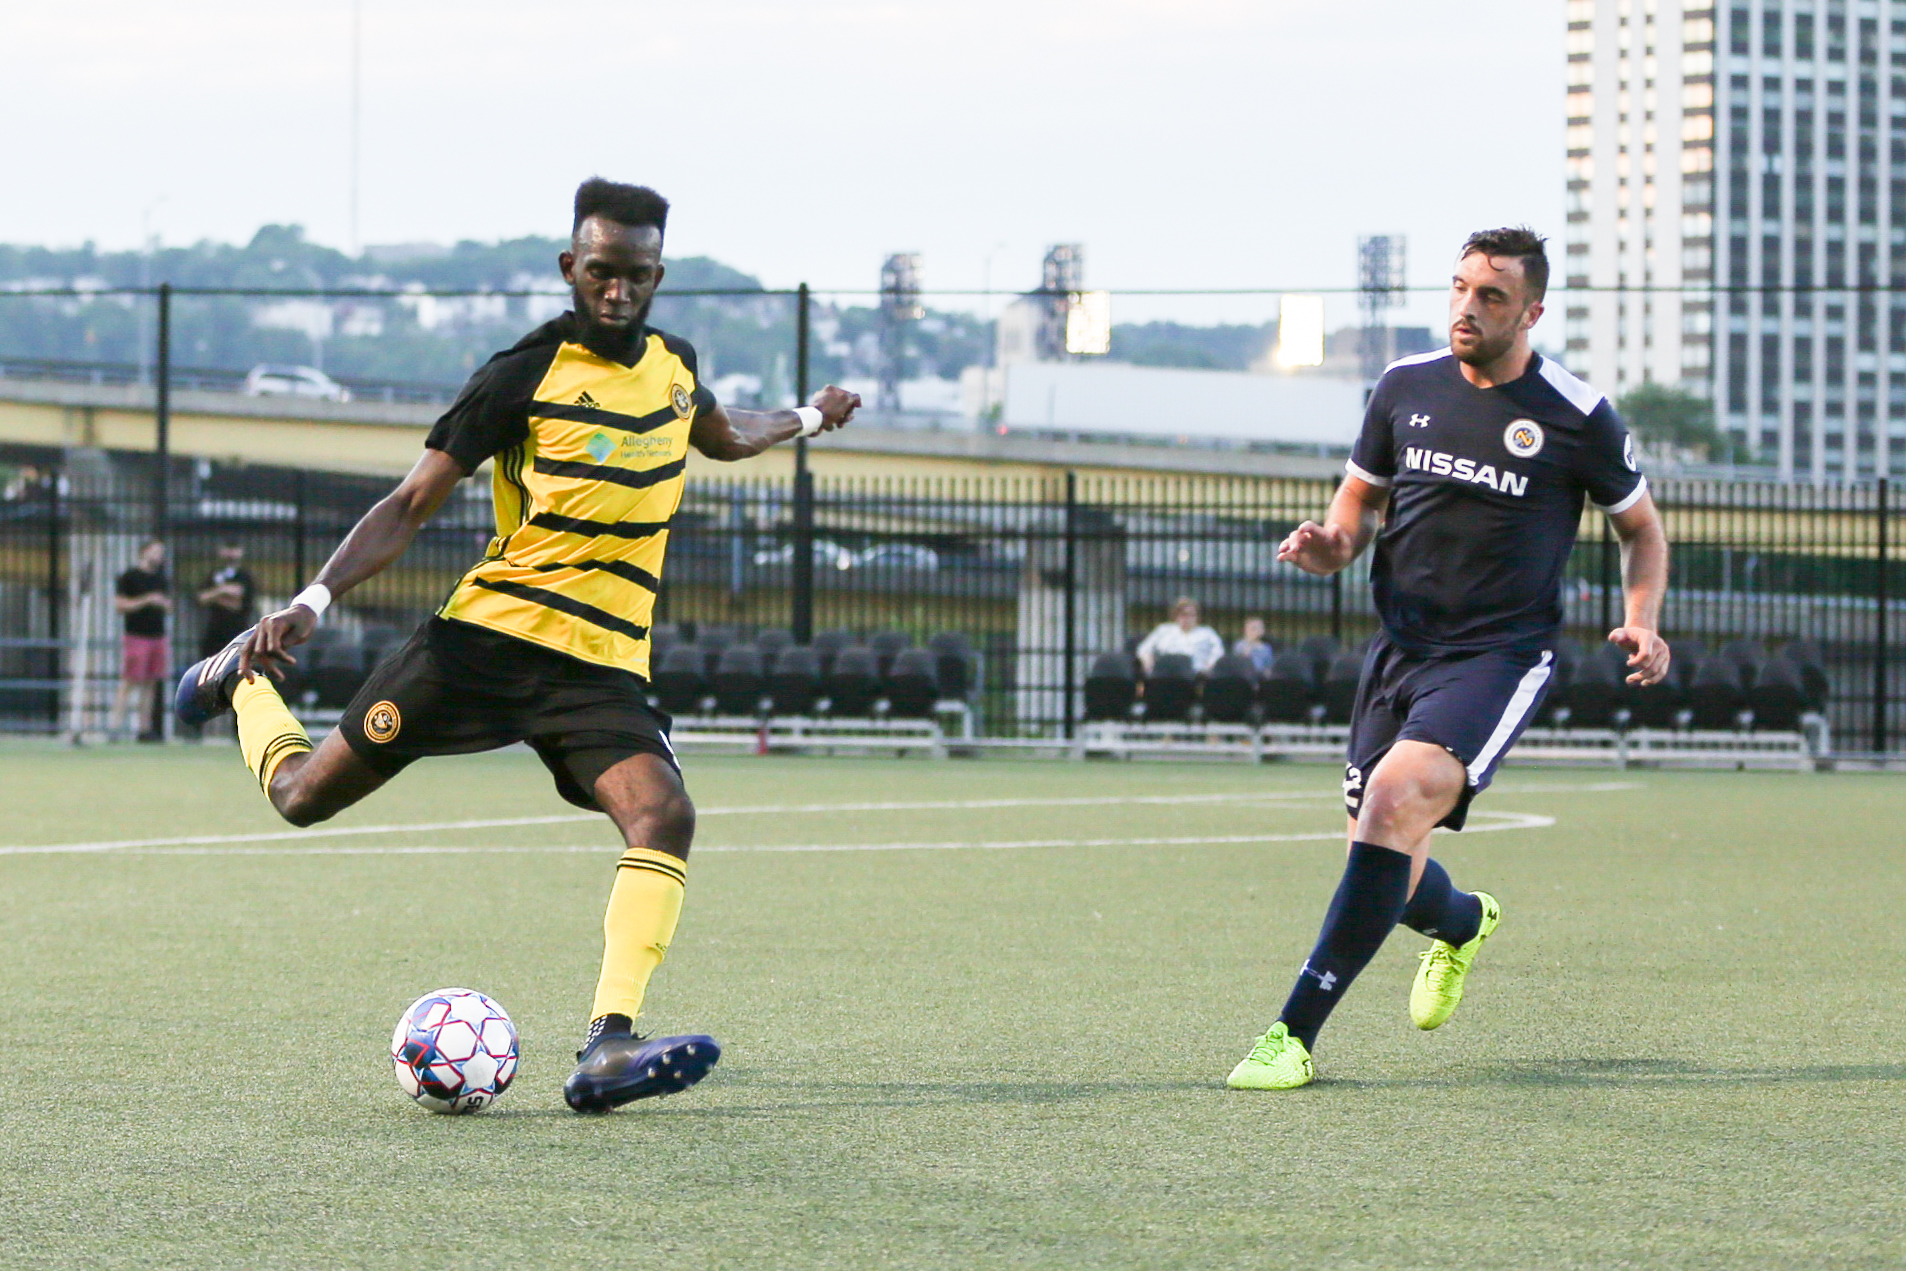 A Riverhounds forward takes a shot on goal as a defender closes fast. Photo: Chris Cowger.